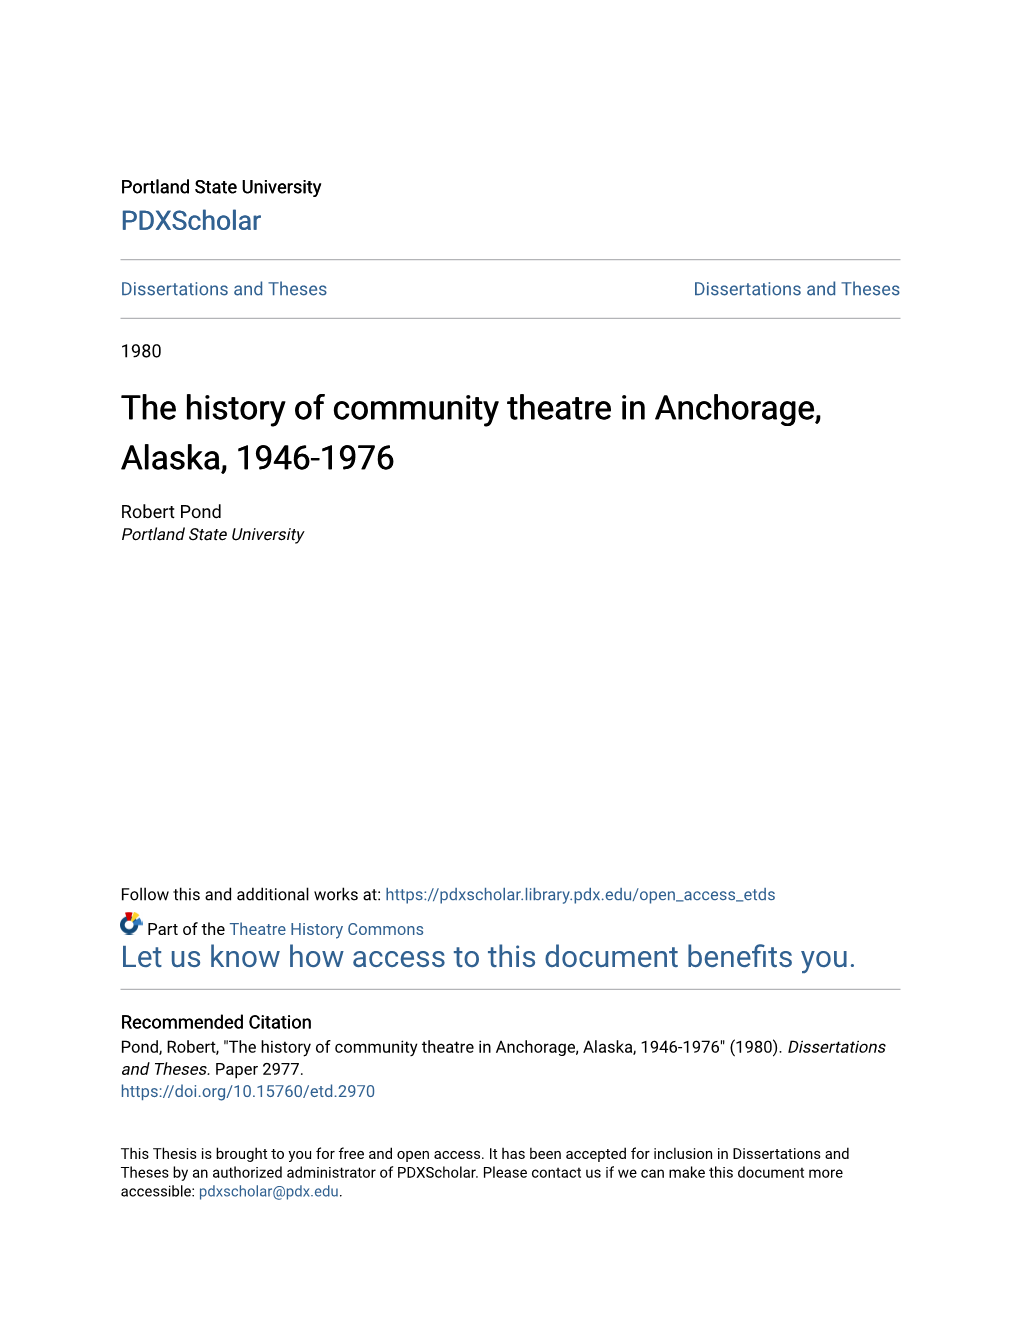 The History of Community Theatre in Anchorage, Alaska, 1946-1976